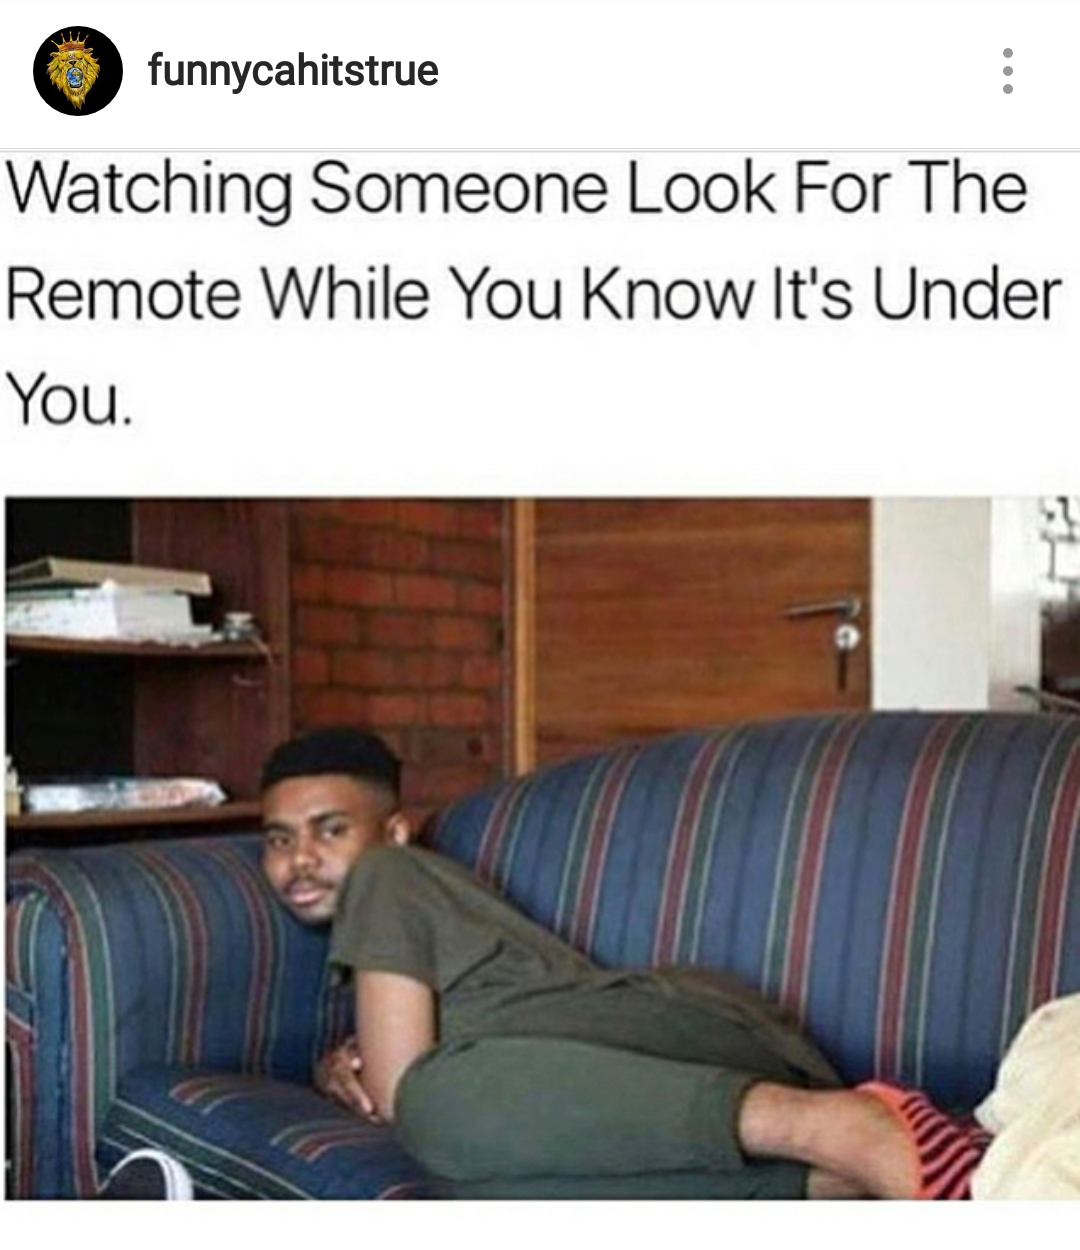 true sibling memes - funnycahitstrue Watching Someone Look For The Remote While You Know It's Under You.